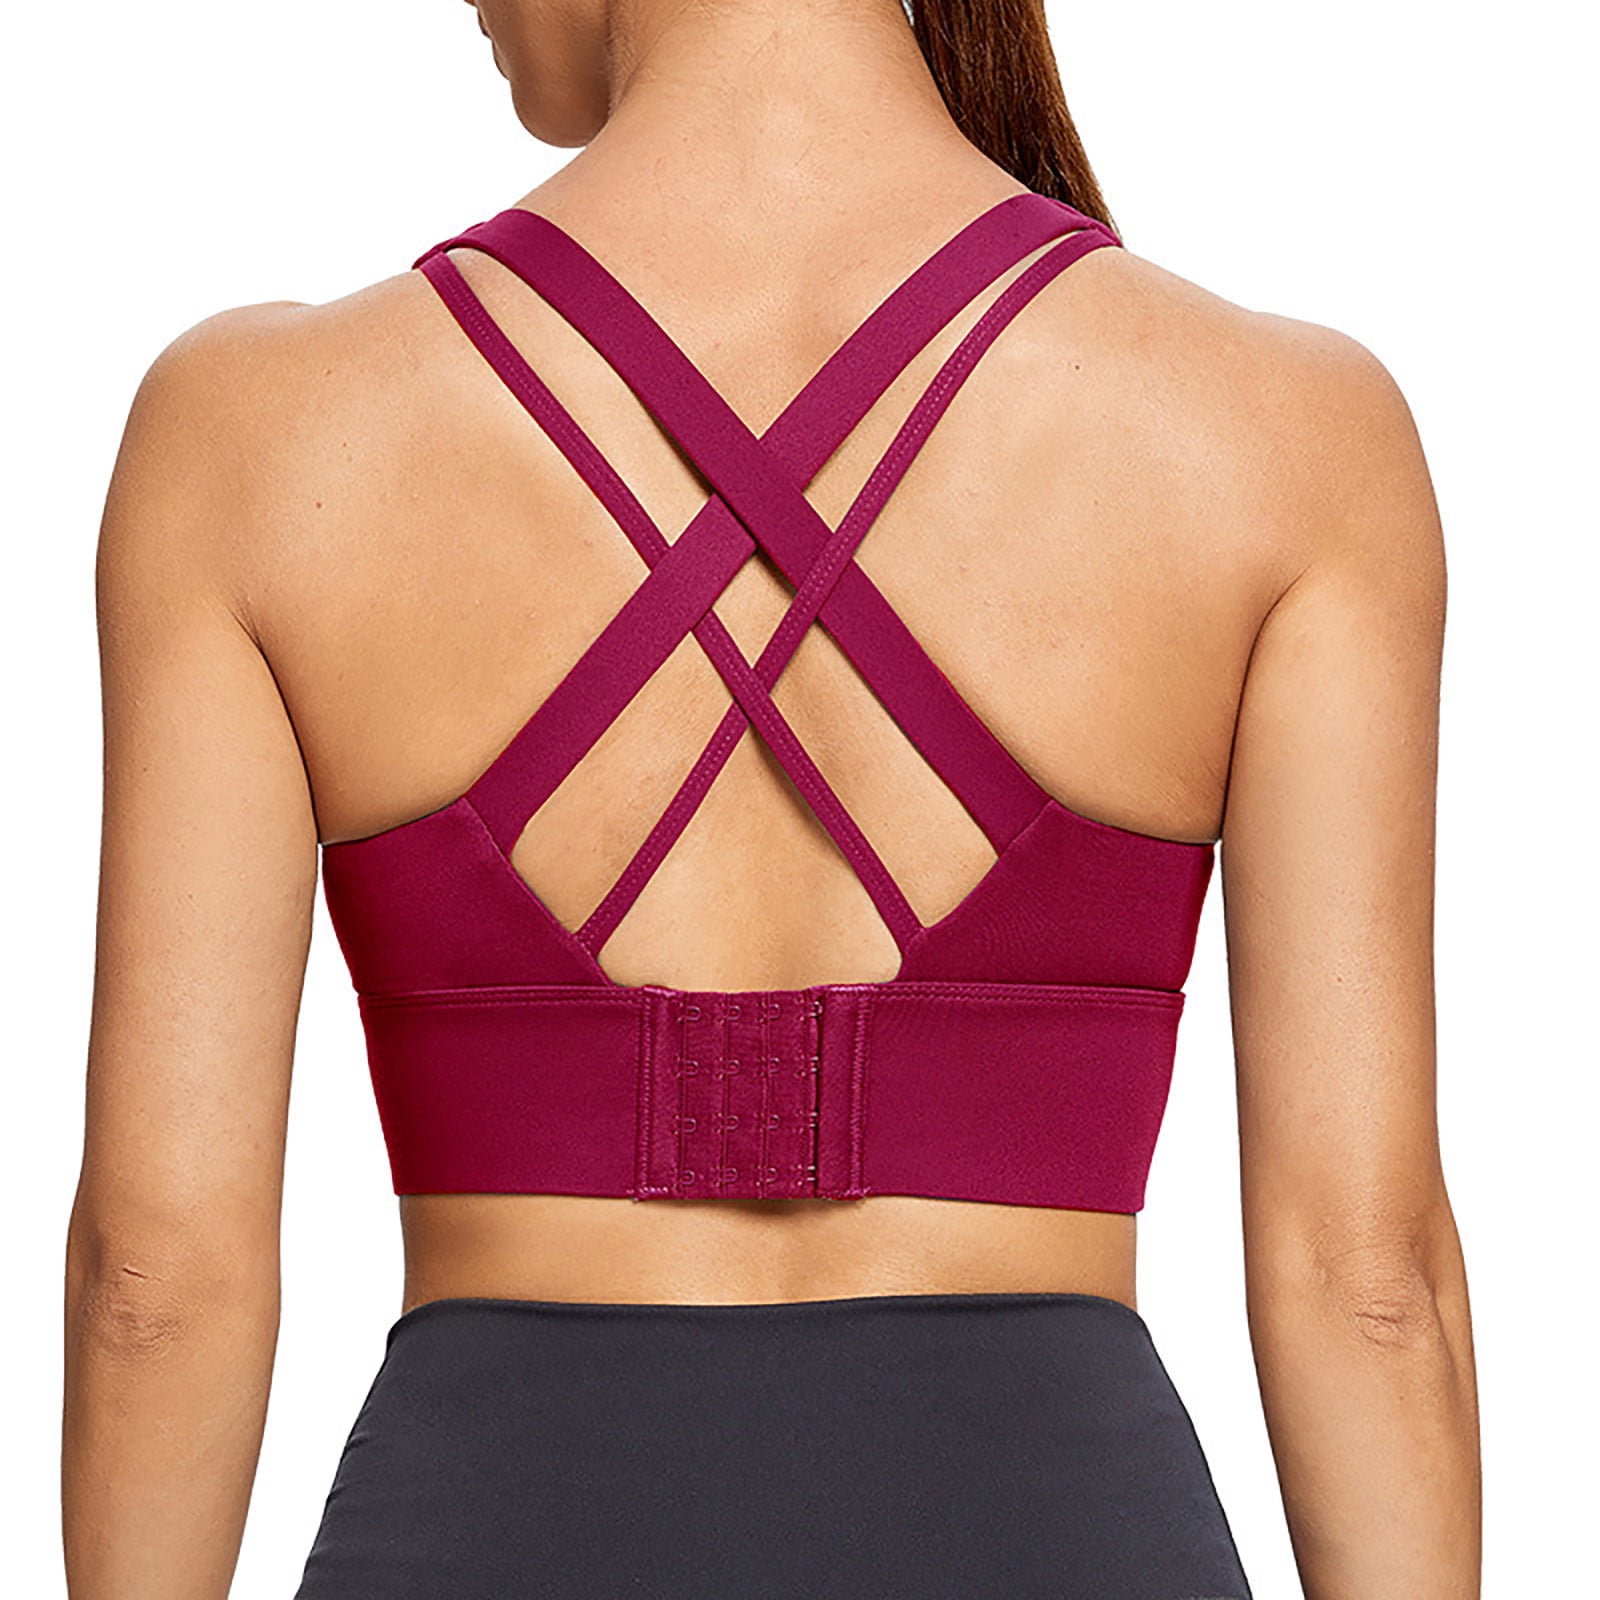 XZNGL Sexy Sports Bras for Women Womens Fitness Summe Sexy Camis